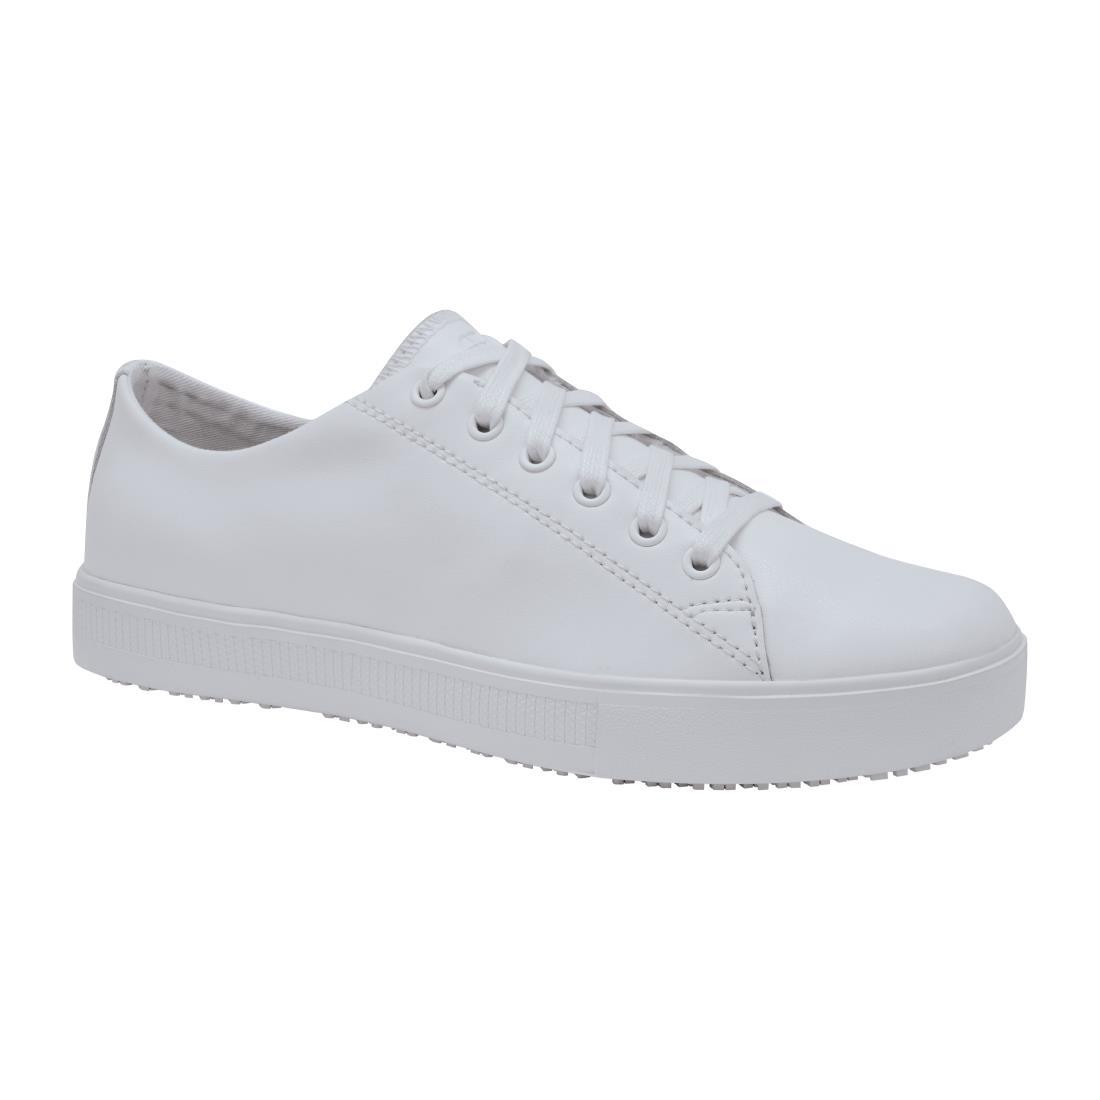 Shoes for Crews Womens Old School White Size 38 - BB647-38 | Go for Green  Shoes for Crews Footwear